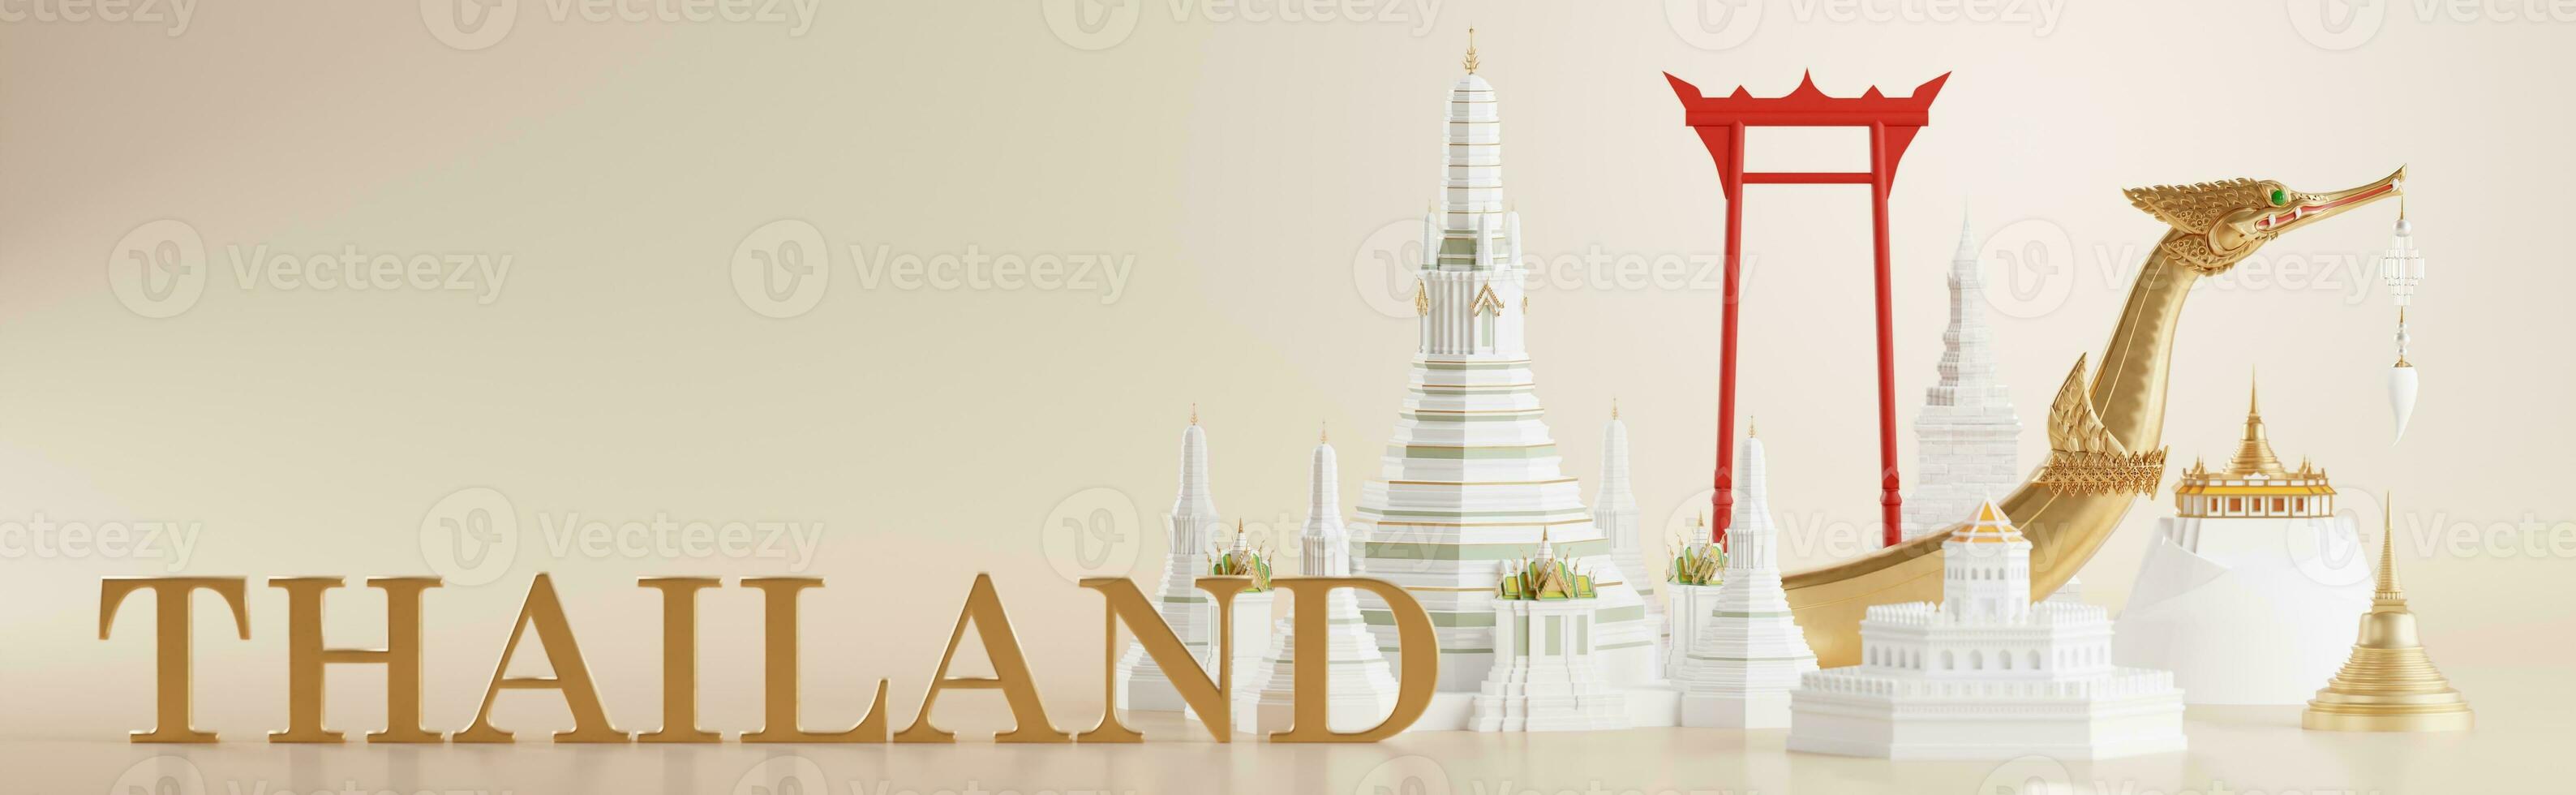 3d rendering illustration background the iconic of thailand travel concept the most beautiful places to visit in thailand in 3d illustration, thai architecture and tradition heritage. photo